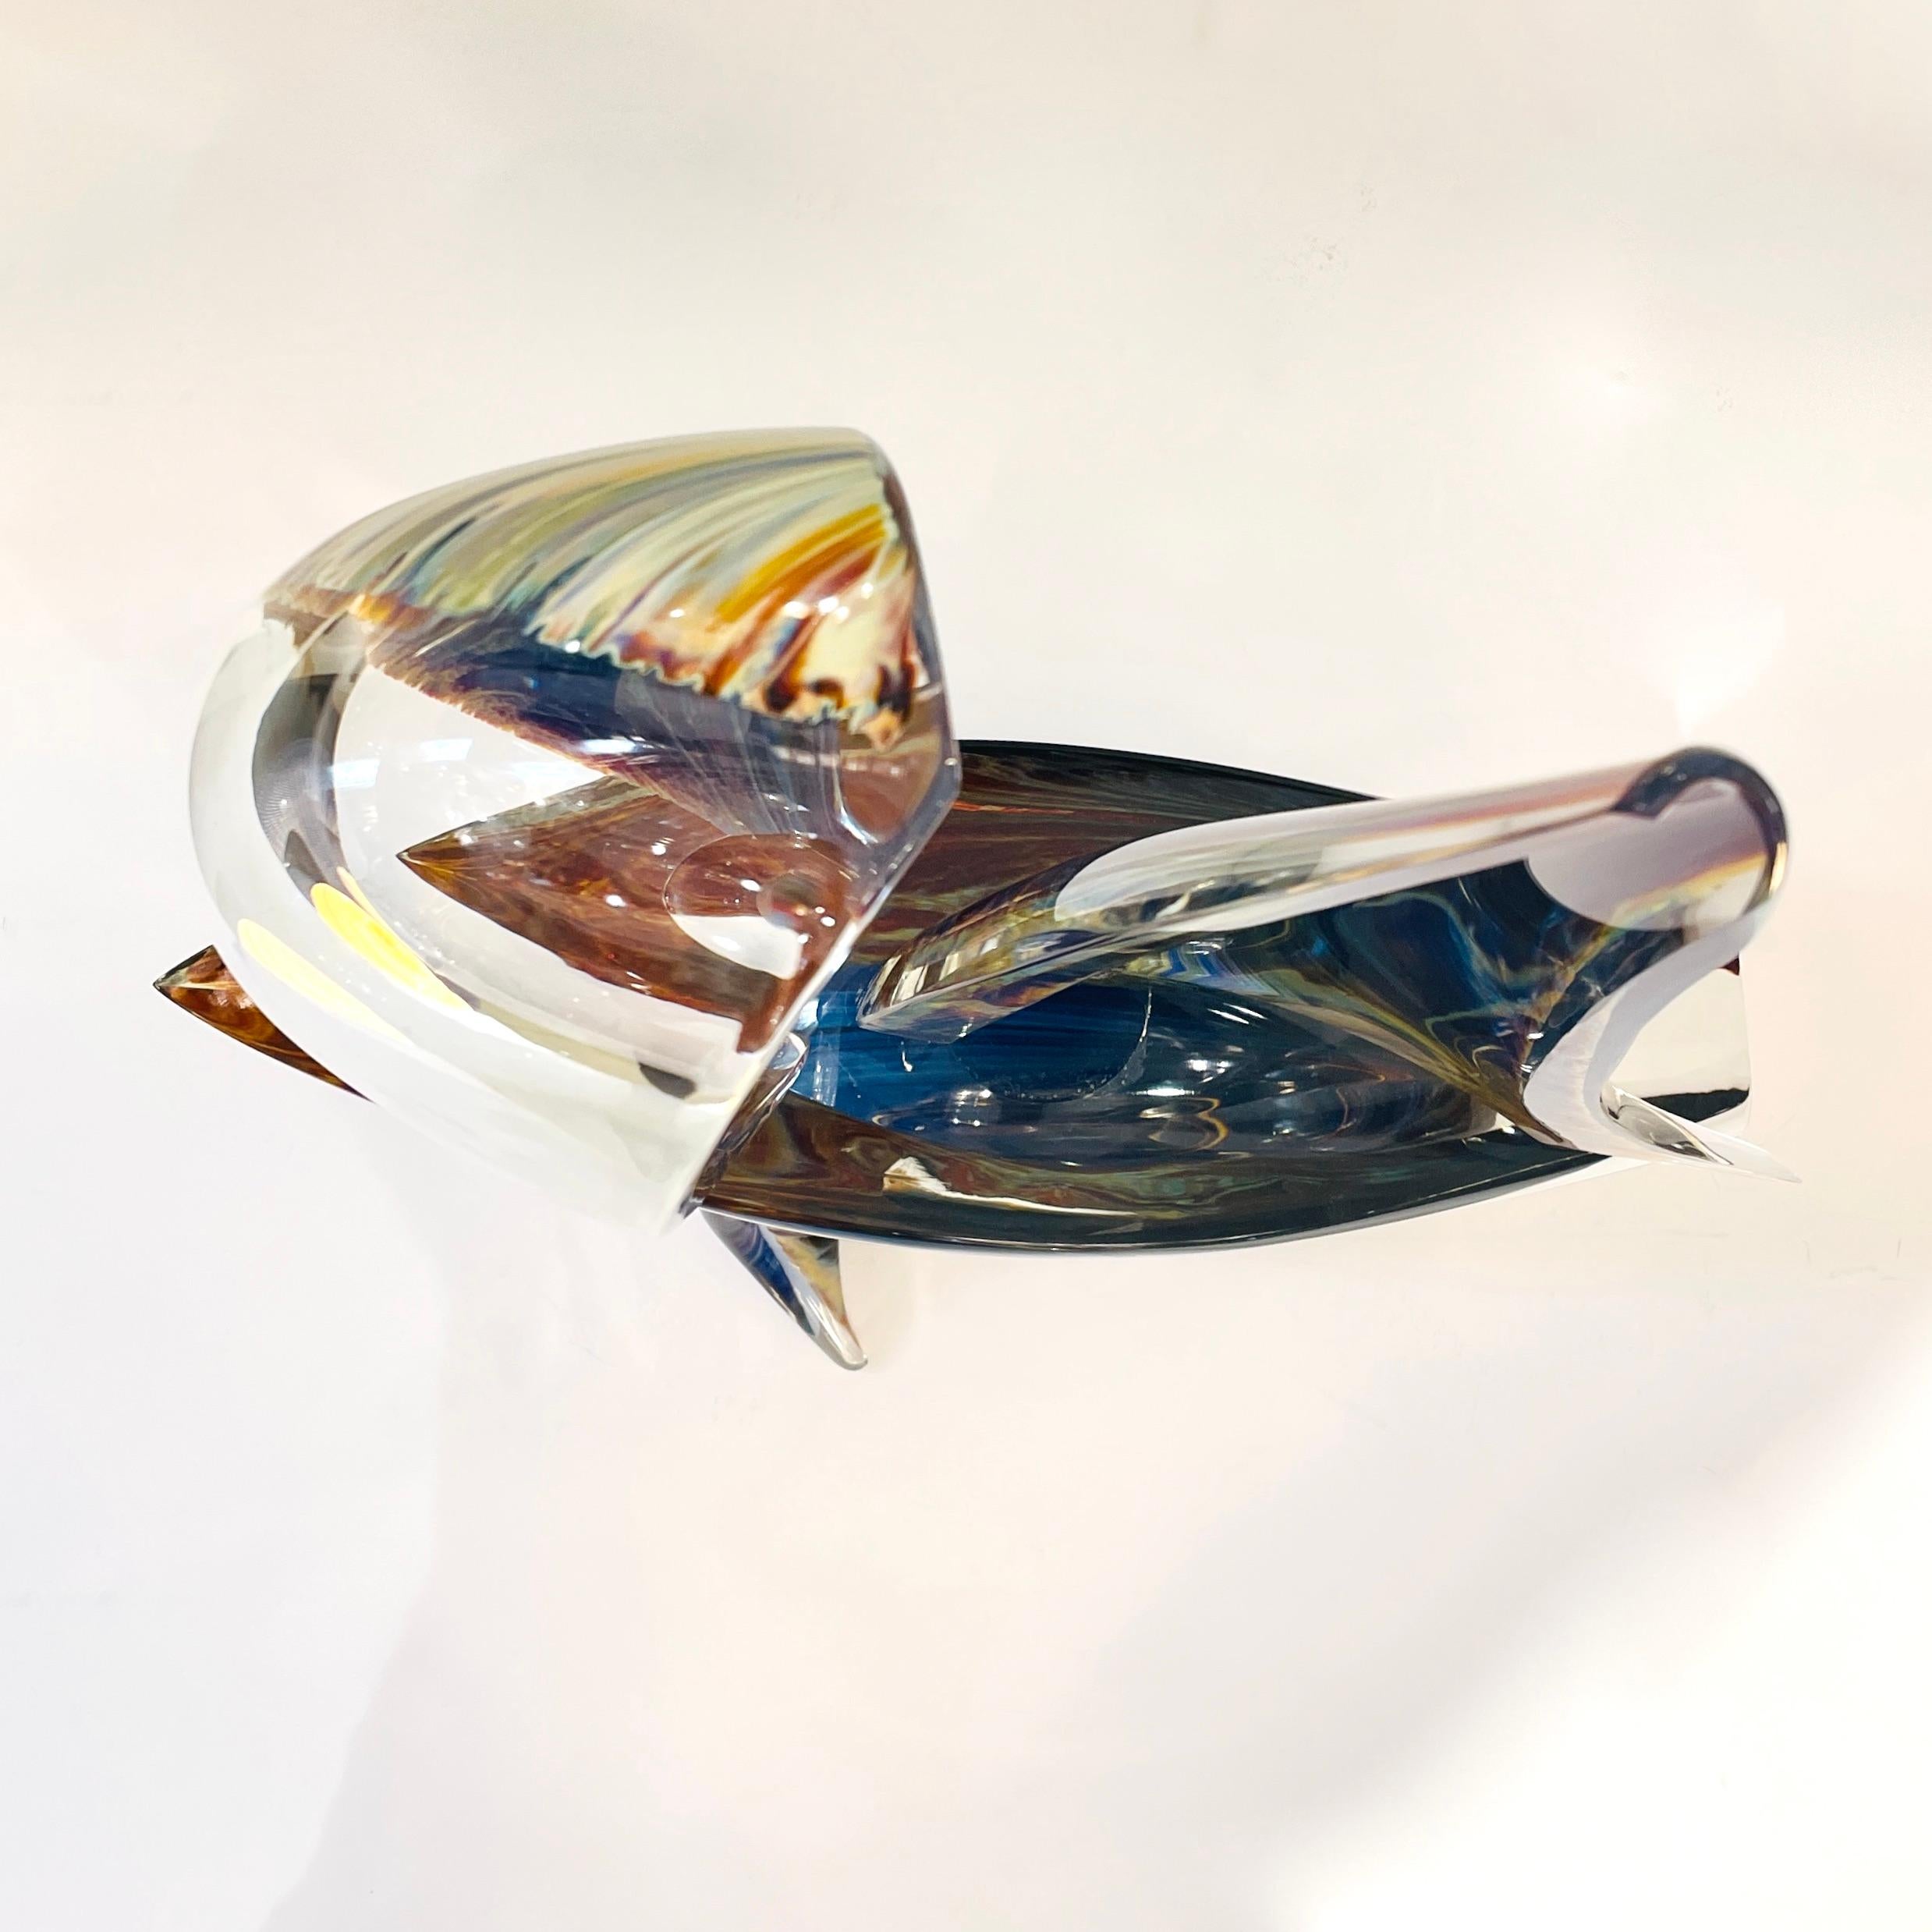 2015 Italian Yellow Blue Brown Crystal Murano Glass Boat Modernist Art Sculpture In Excellent Condition For Sale In New York, NY